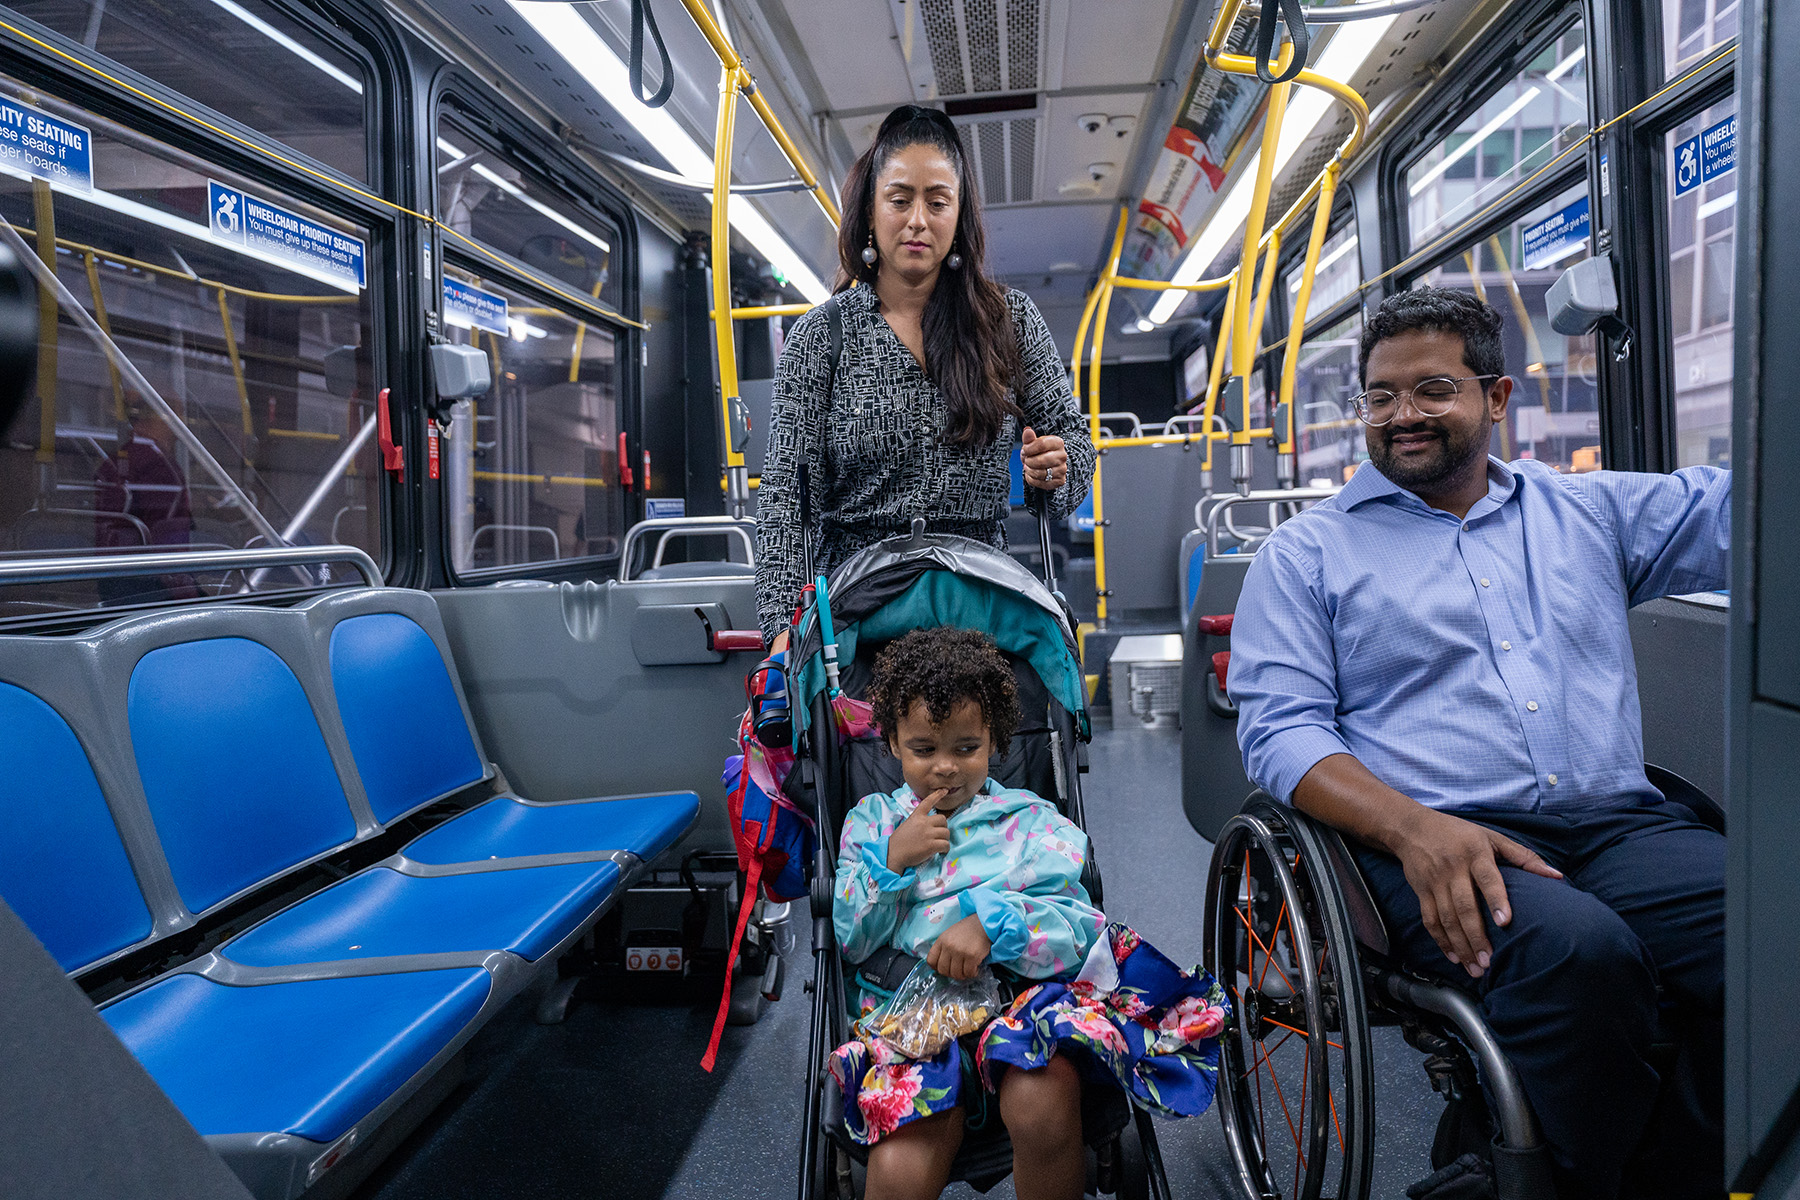 Man in wheelchair and mother and her child are in a bus taking a ride.